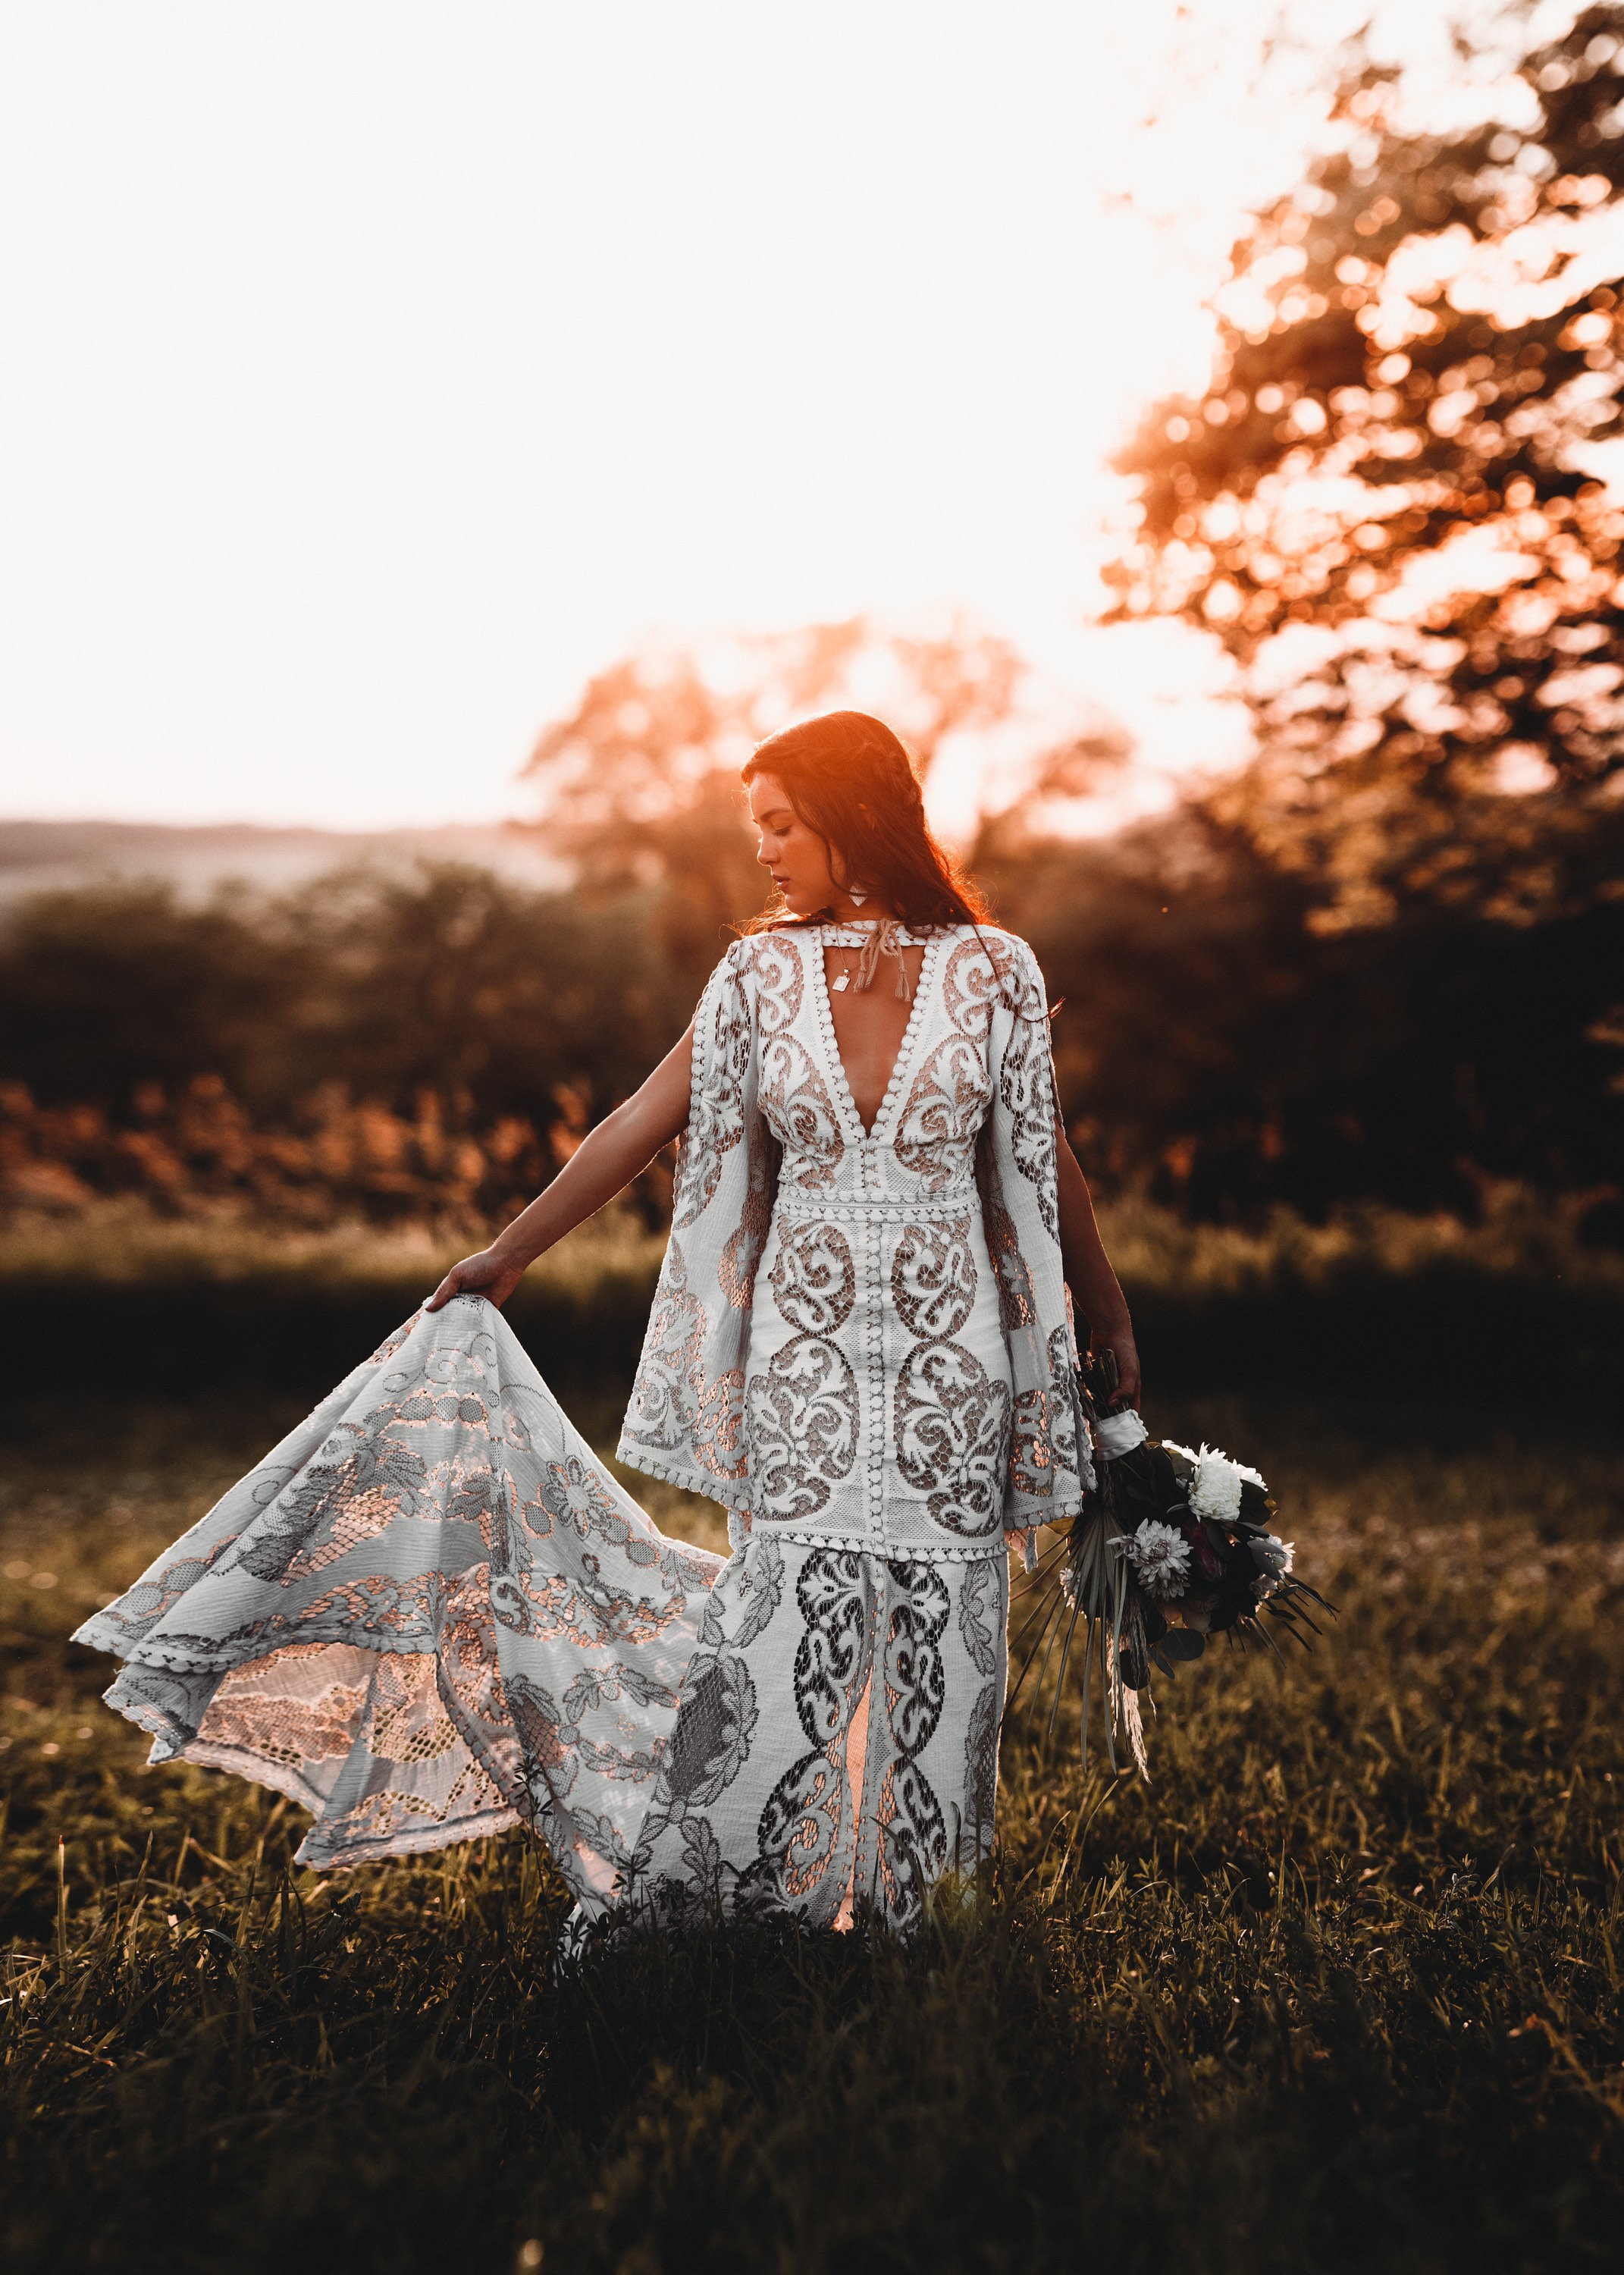 Women's Boho Wedding Dresses for Bride Floral Lace Low Back Thin Straps A  Line with Criss Cross Bohemian Dress Ivory US2 at  Women's Clothing  store